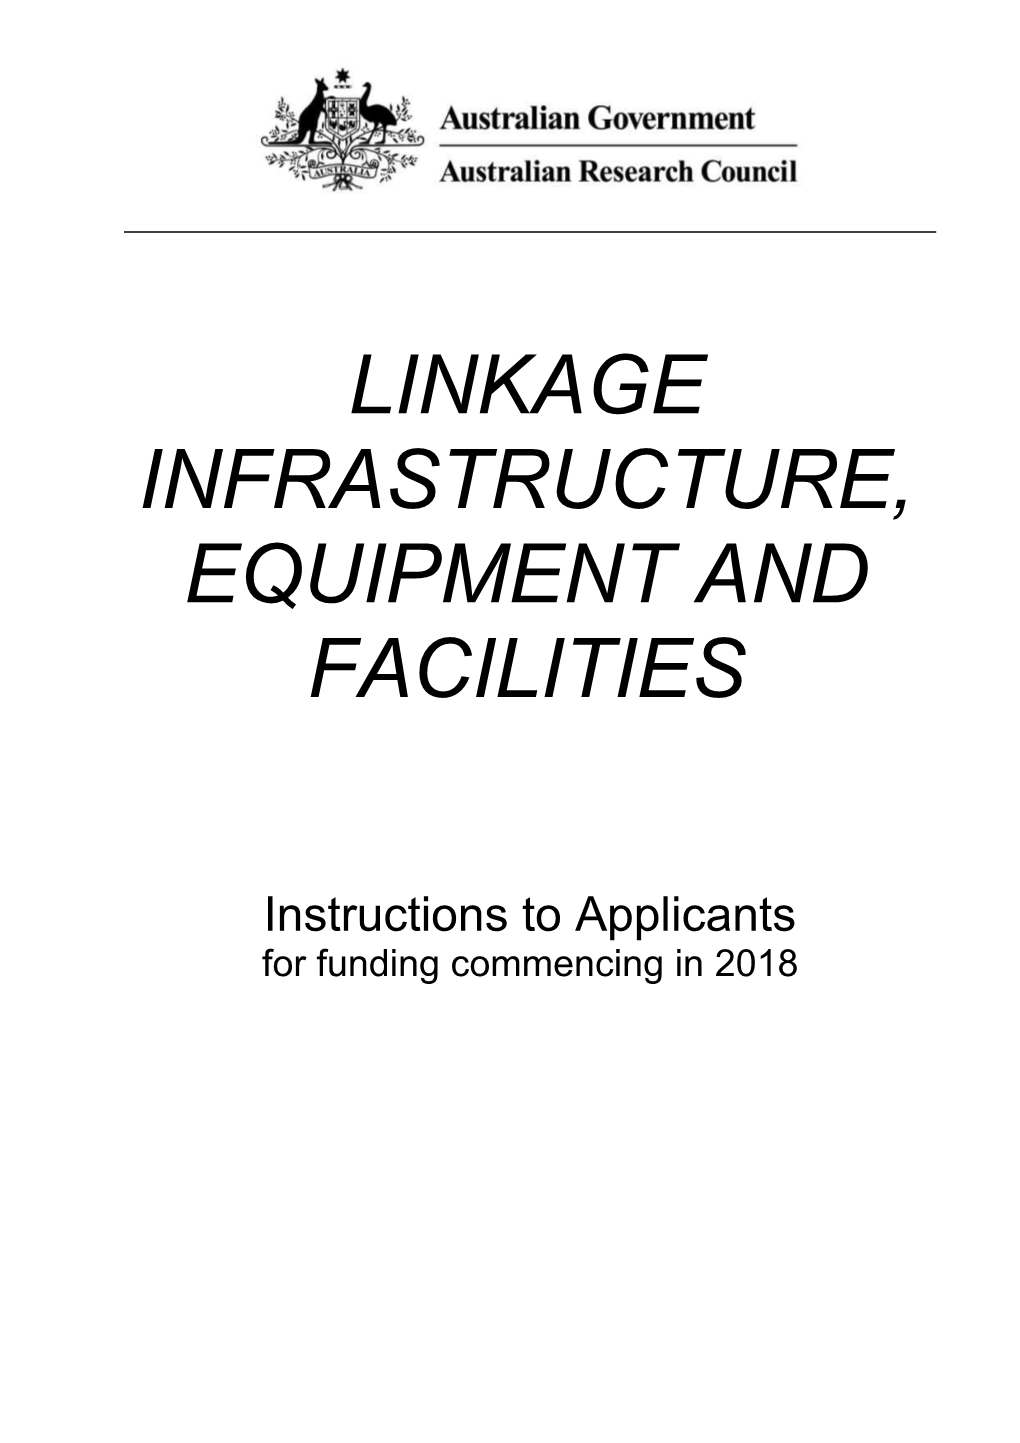 Linkage Infrastructure, Equipment and Facilities for Funding Commencing in 2018 Instructions